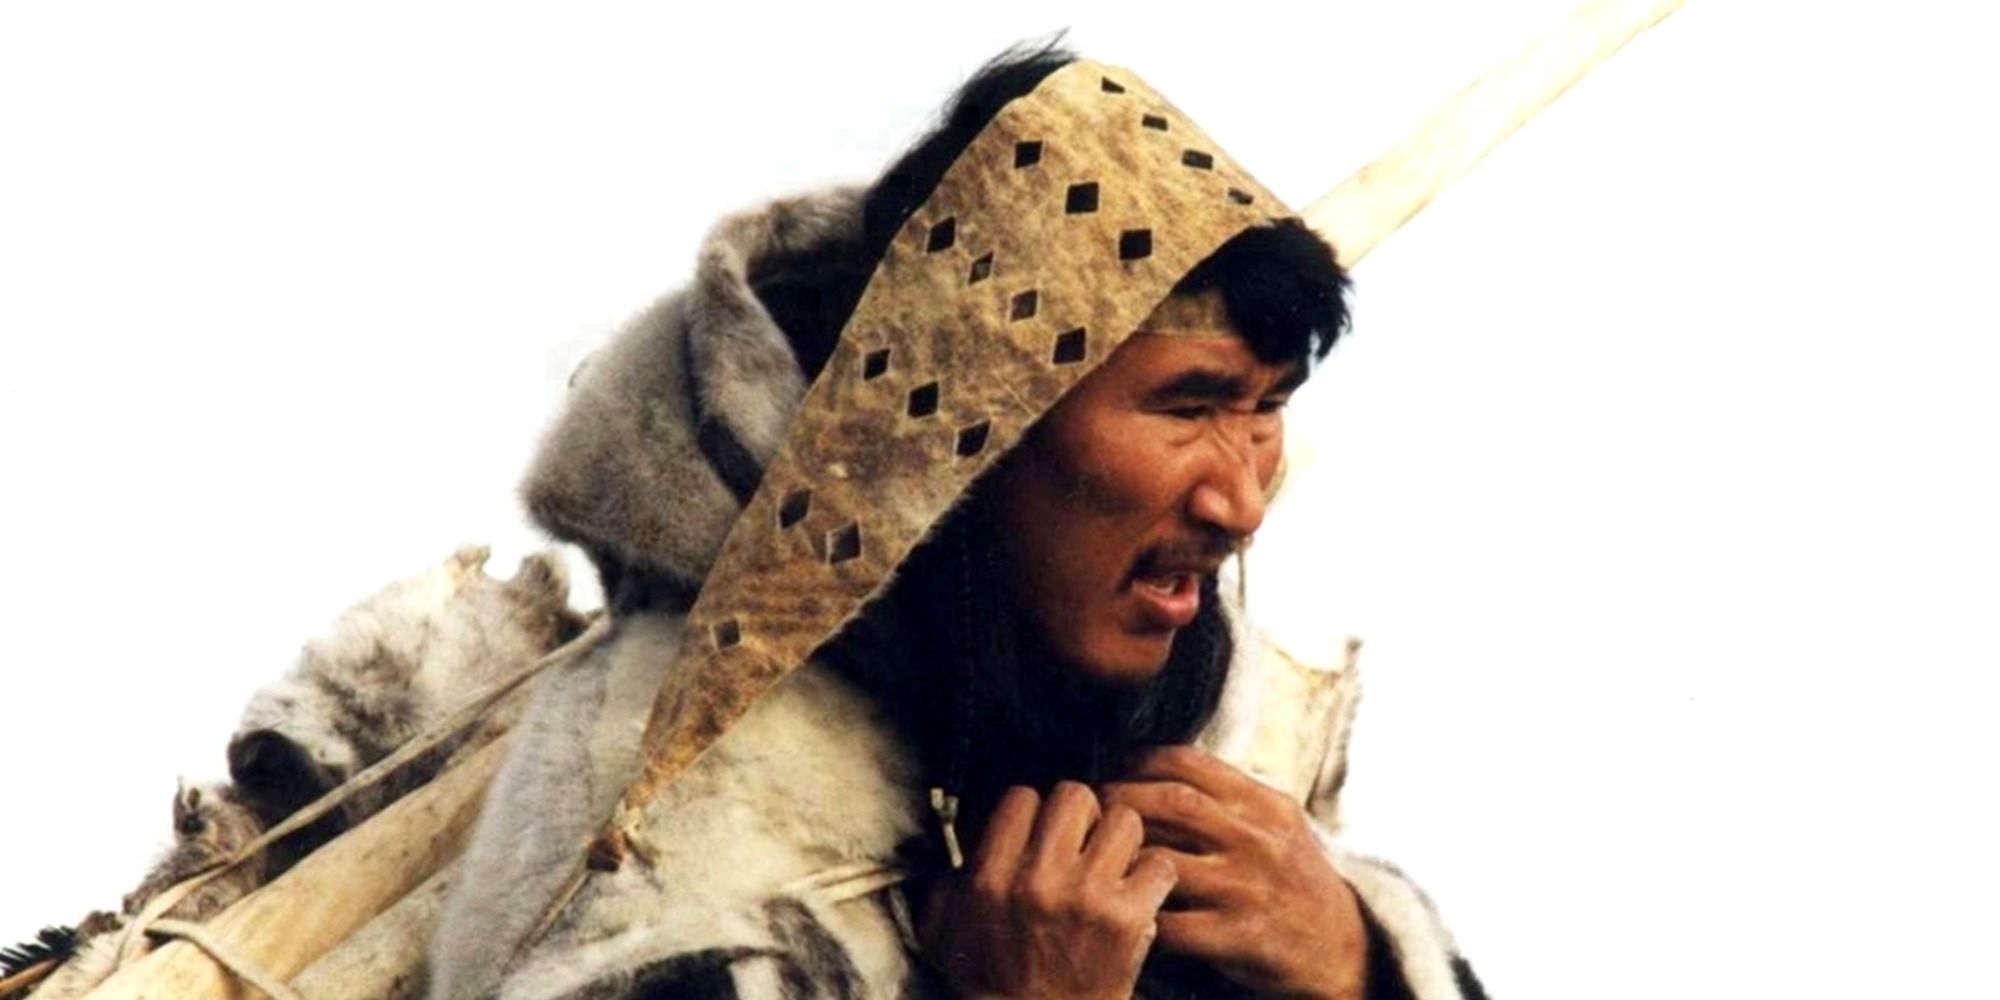 Atanarjuat with an expression of hardship in 'Atanarjuat The Fast Runner' (2001)